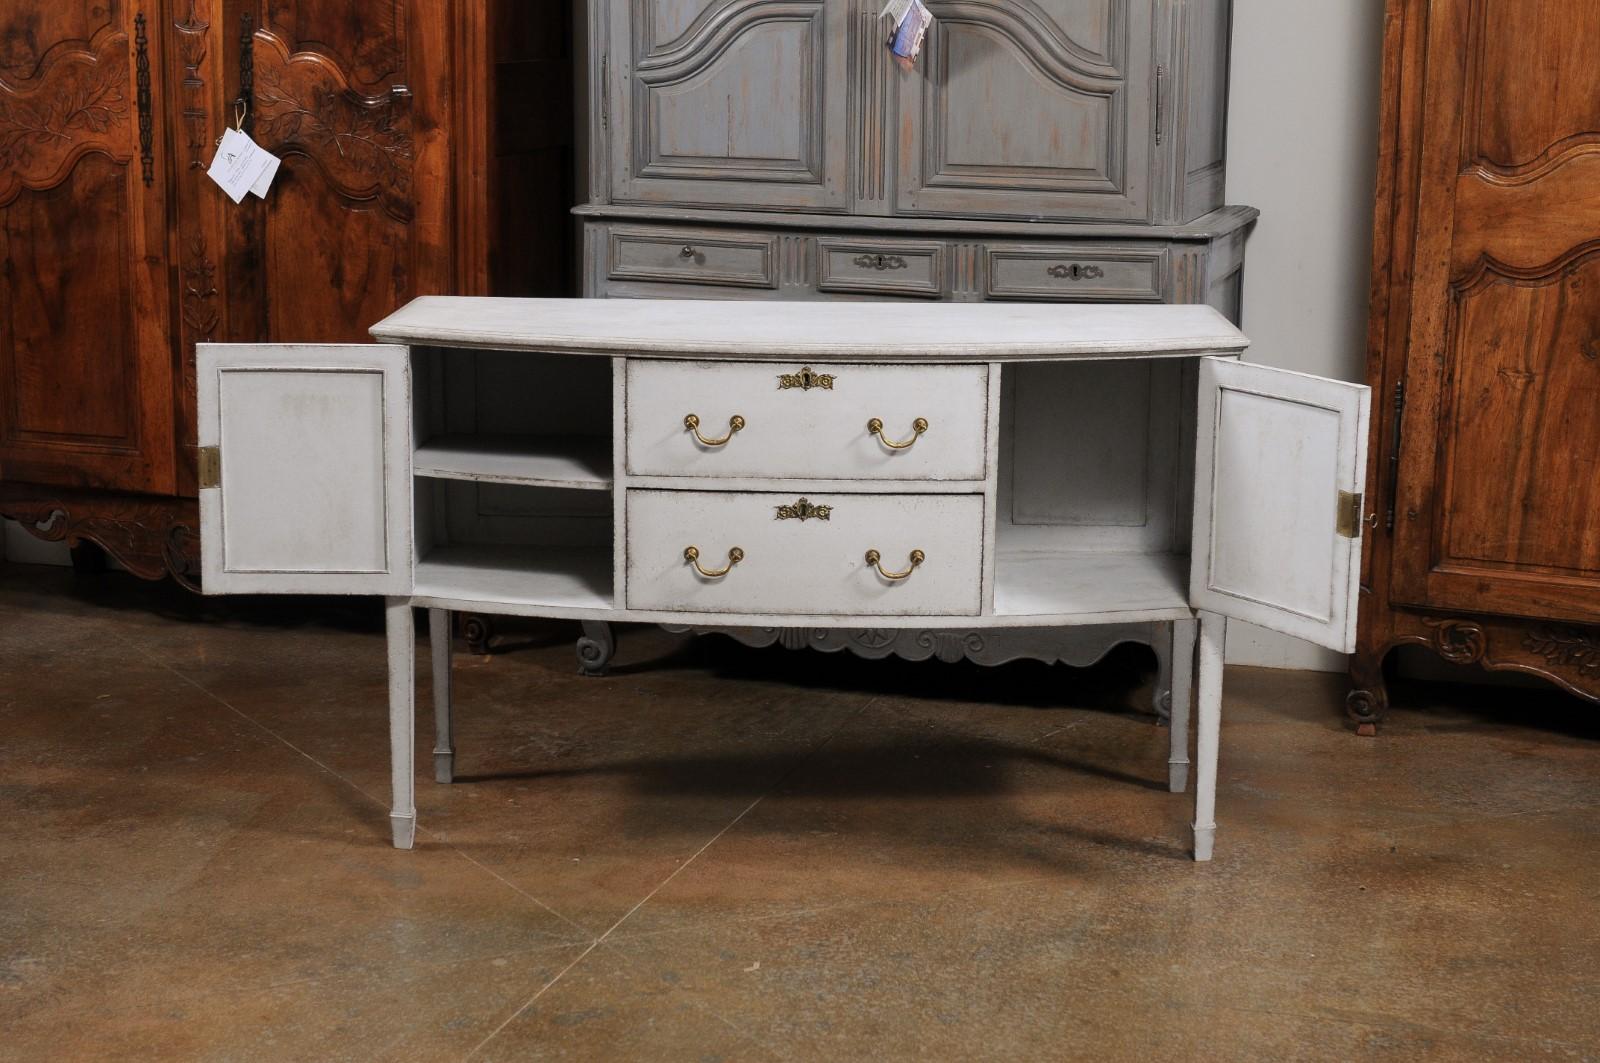 European 1820s Painted Sideboard with Two Doors and Two Drawers 6